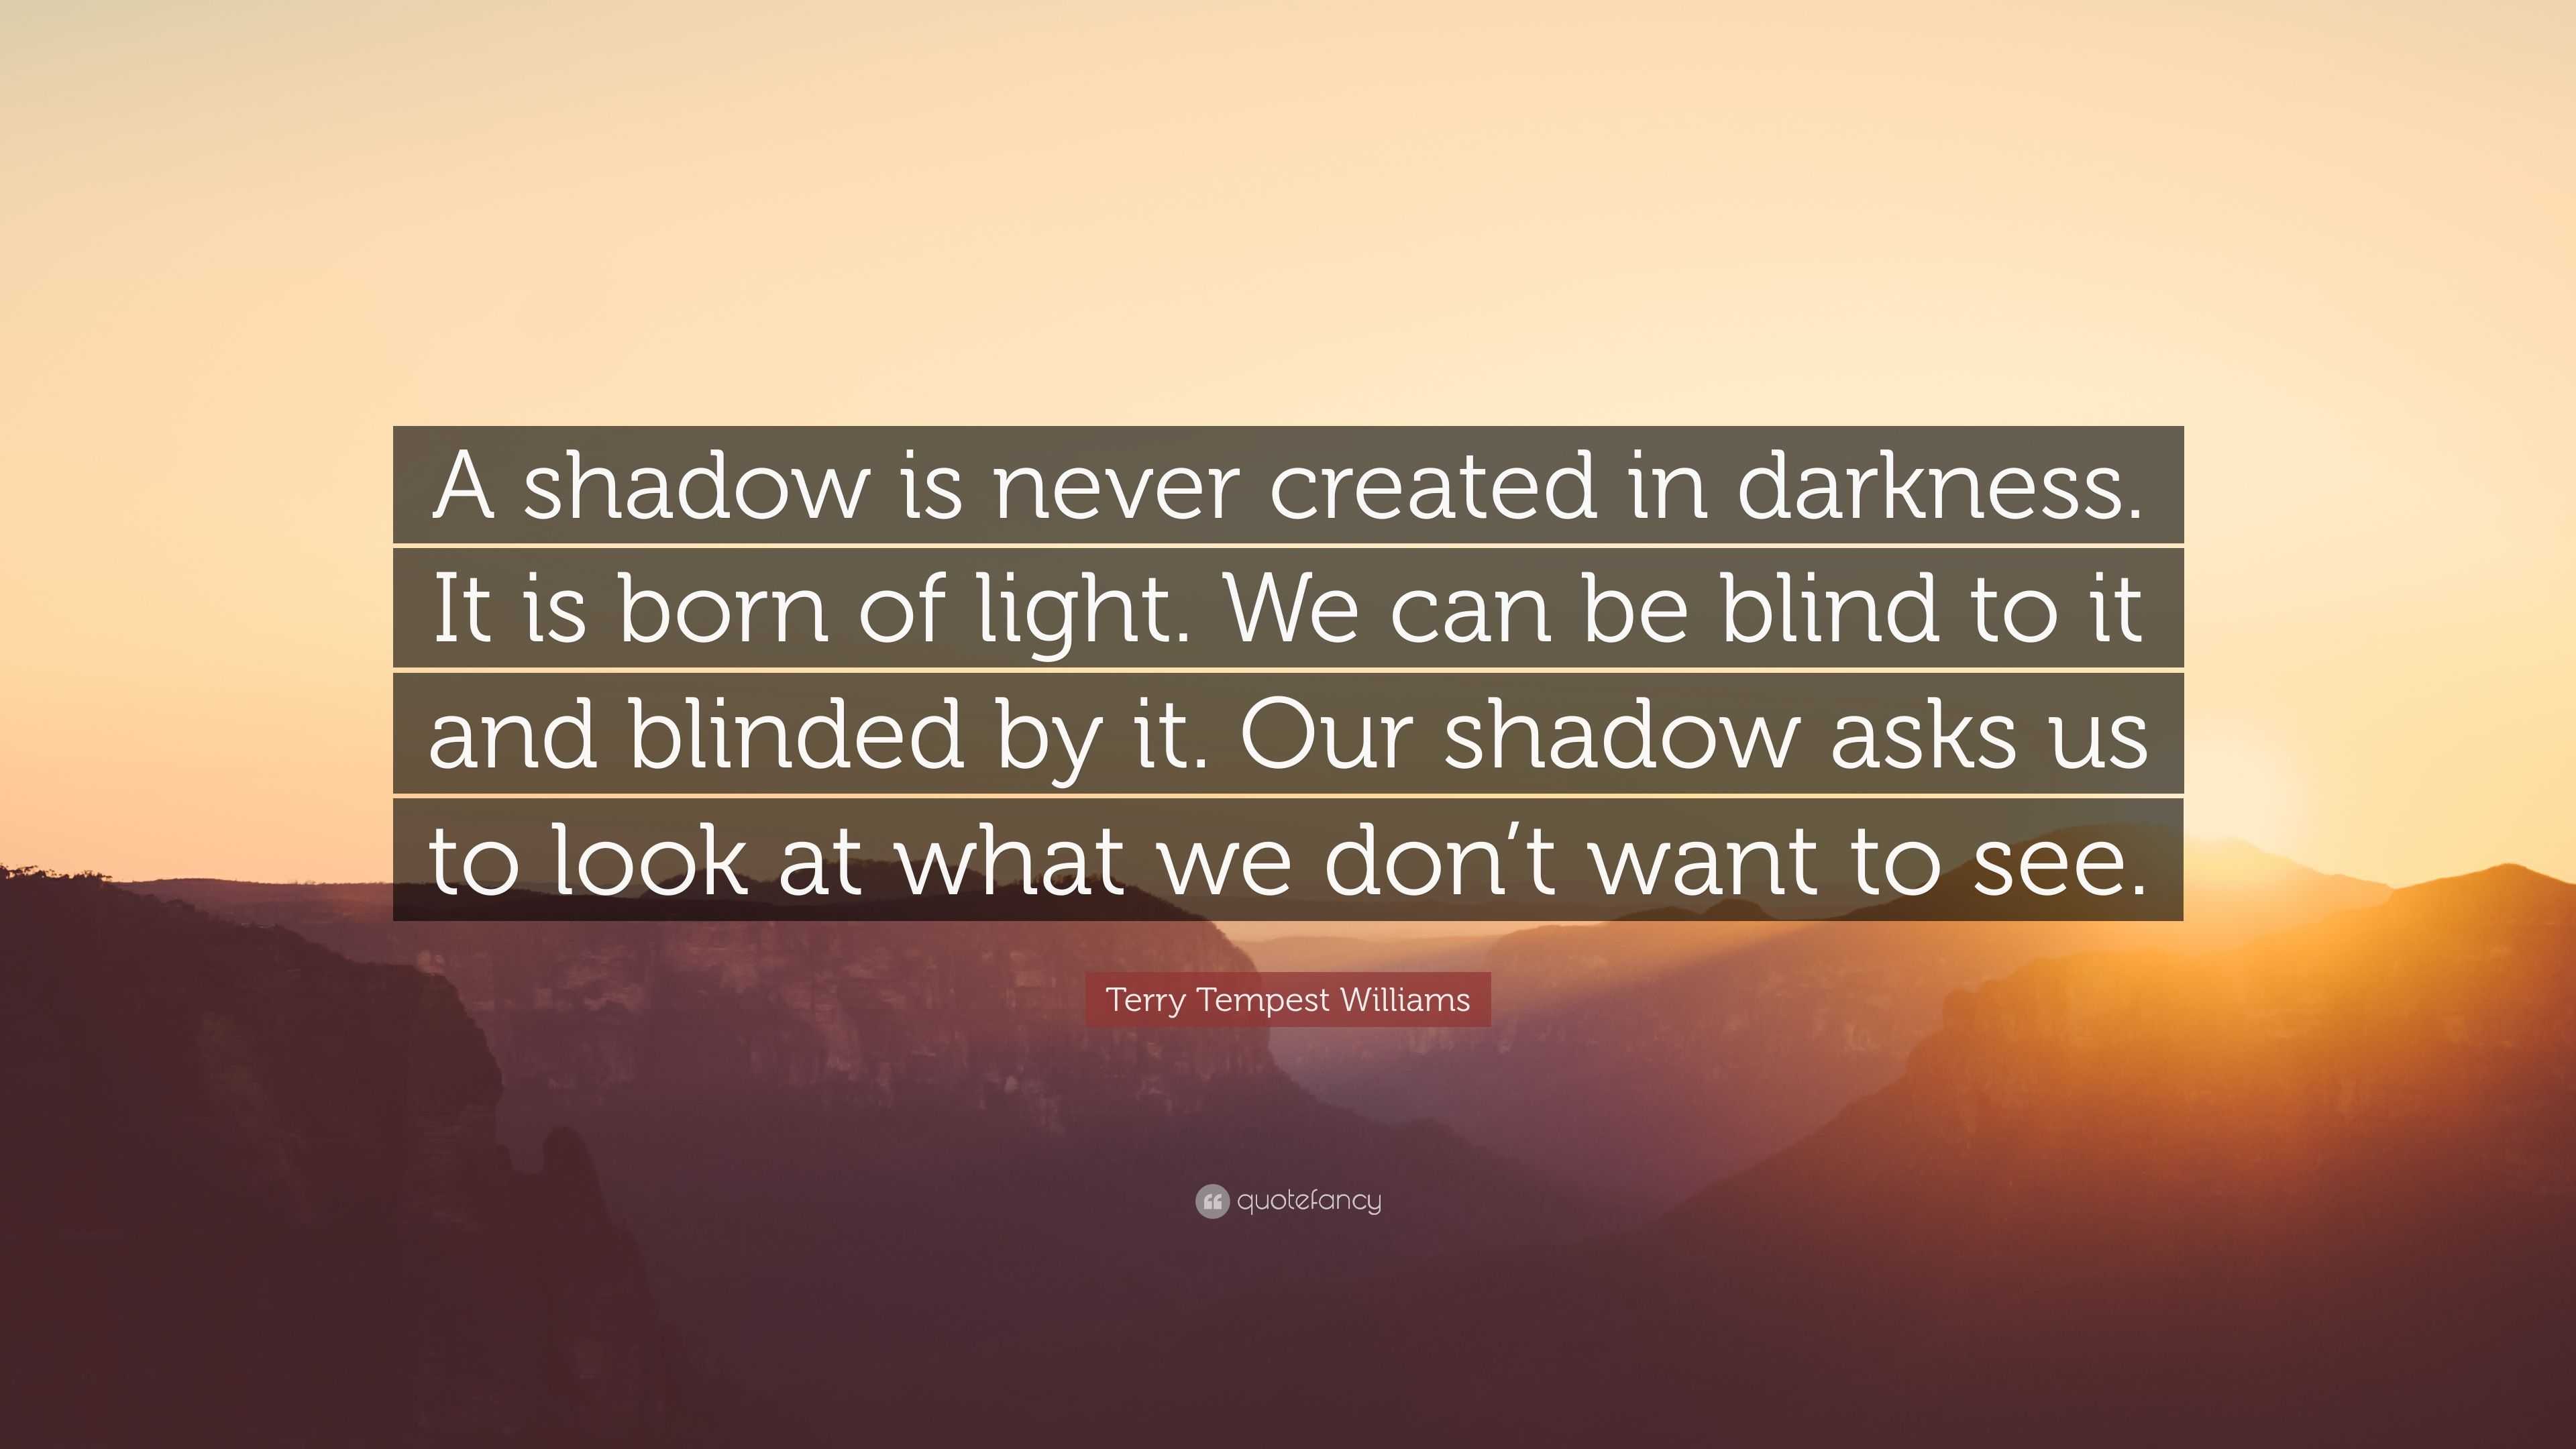 Terry Tempest Williams Quote: “A shadow is created in darkness. It is born of light. We can be blind to it and blinded by it. Our shadow asks us